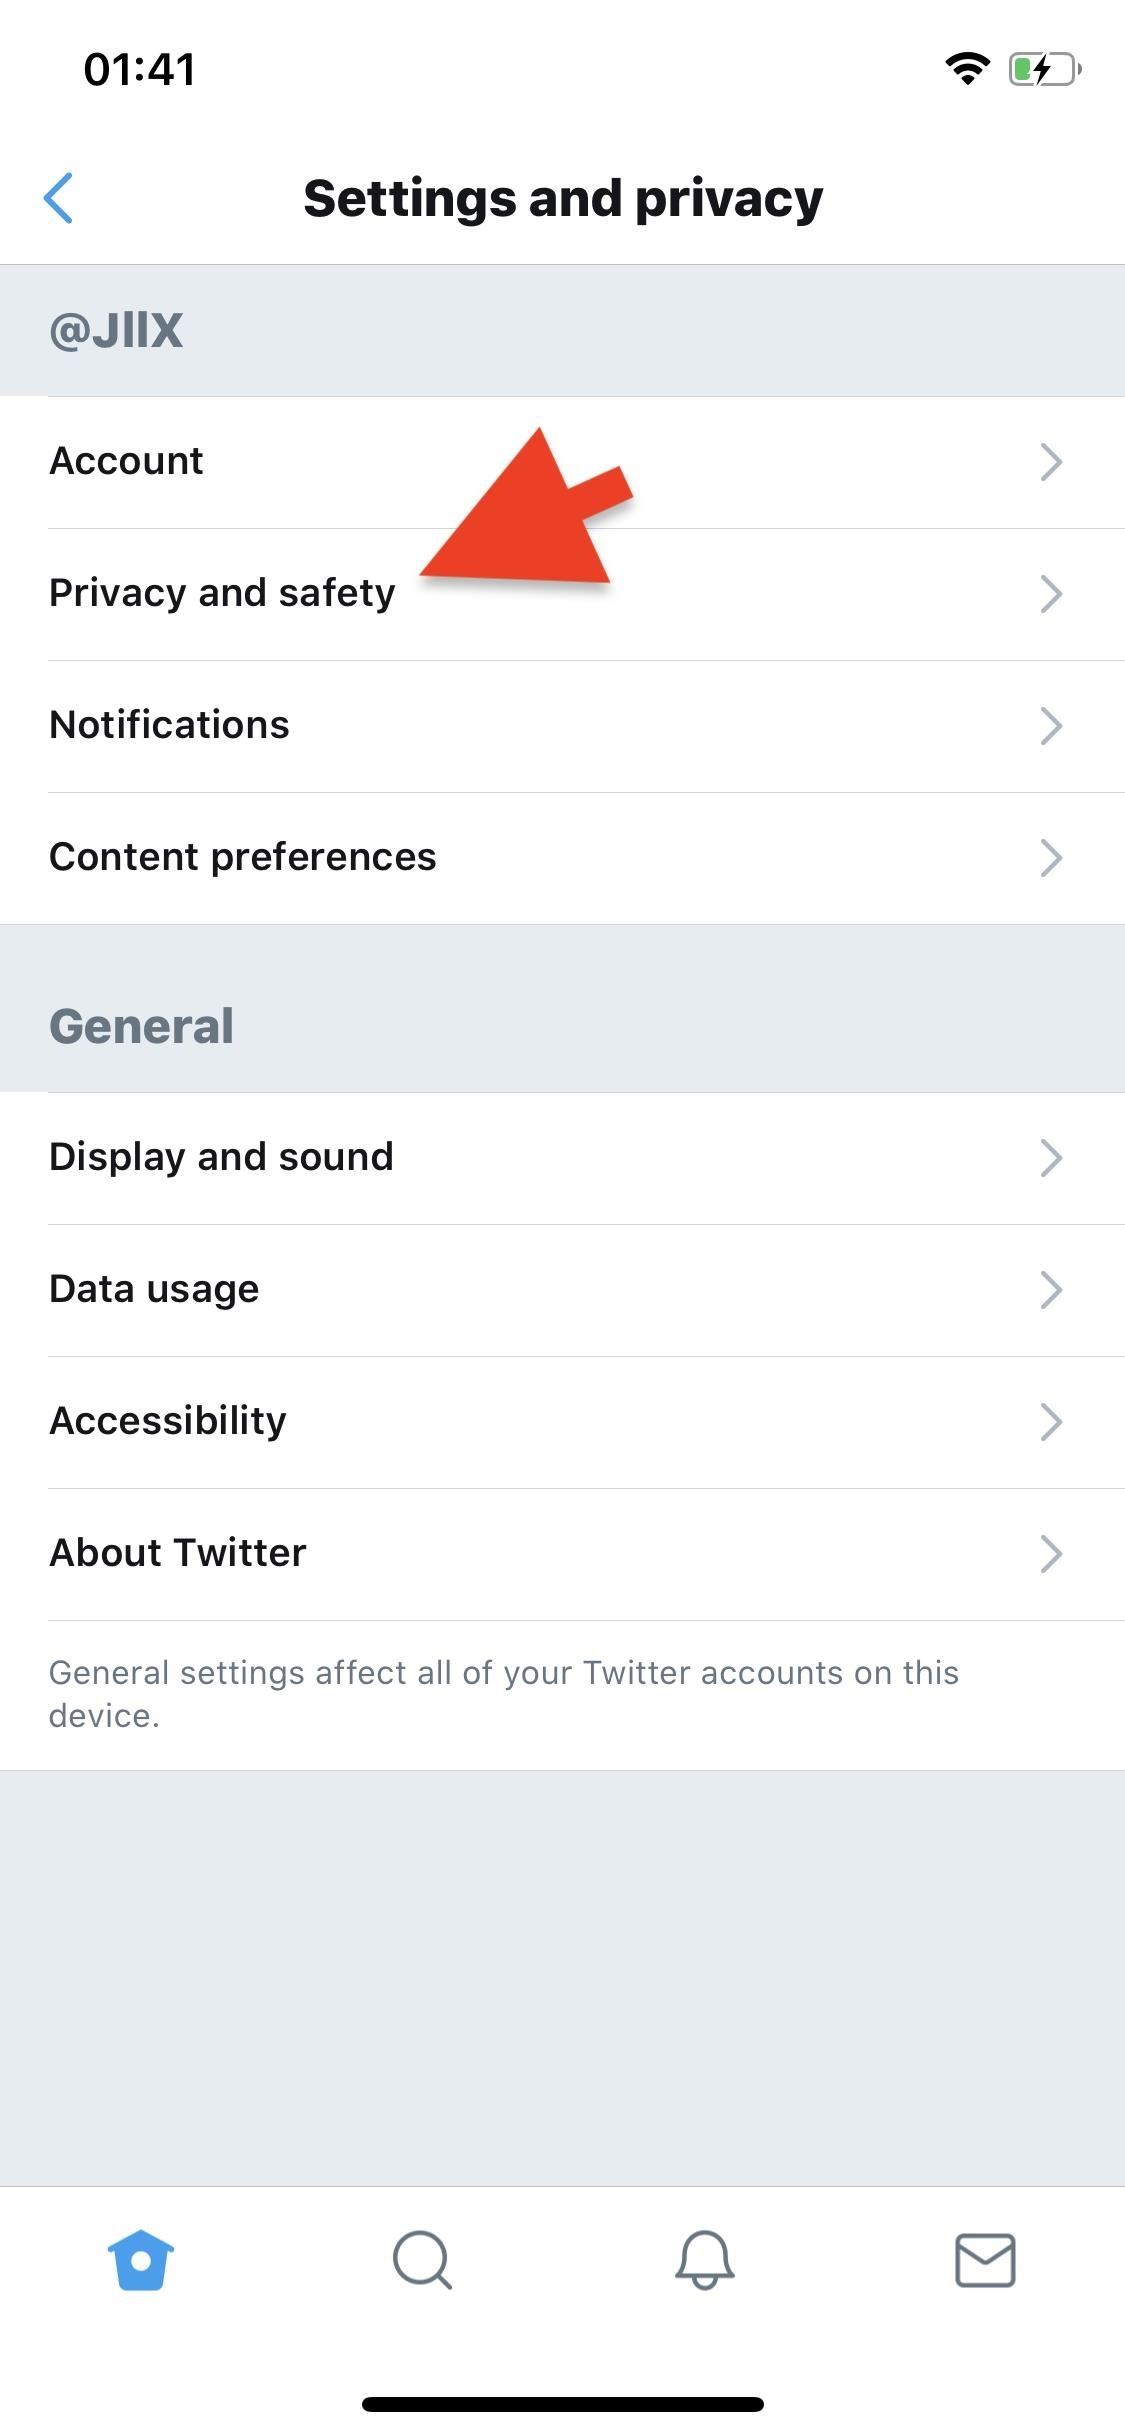 Remove & Disable Photo Tags on Twitter for Better Account Privacy